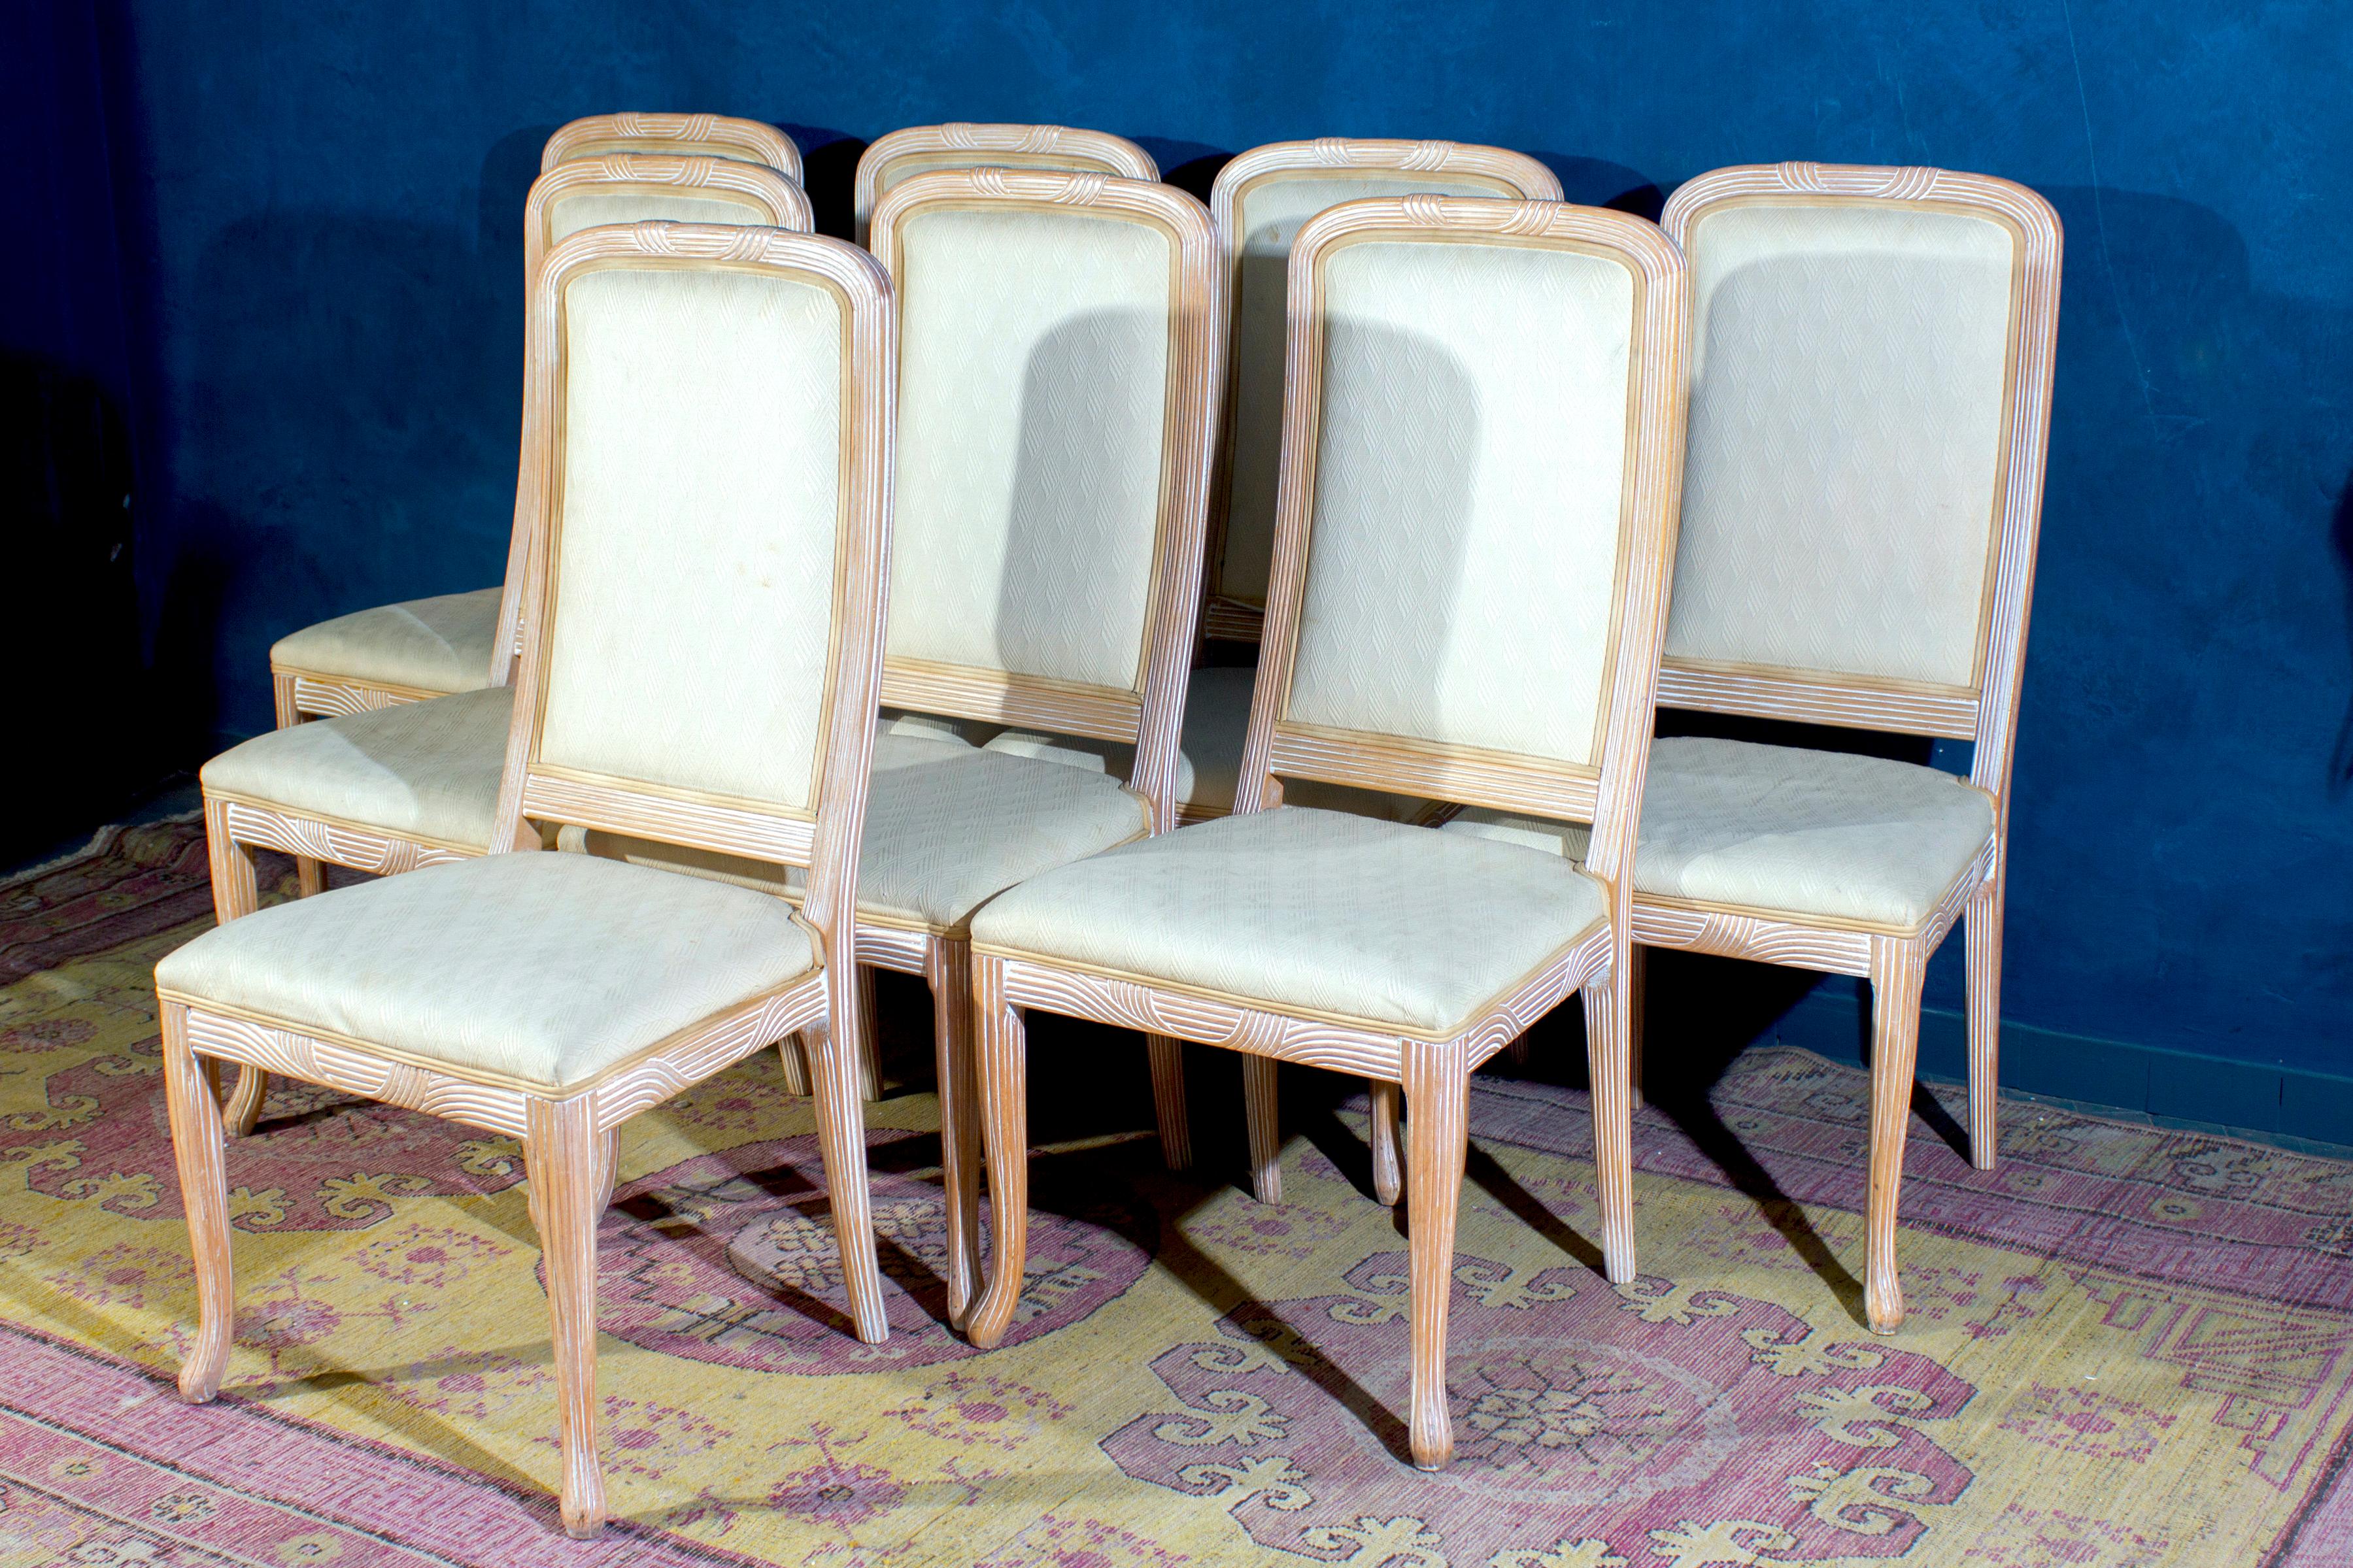 Fine Set of 8 Italian White Decapé Wood Chairs, 1970s For Sale 2